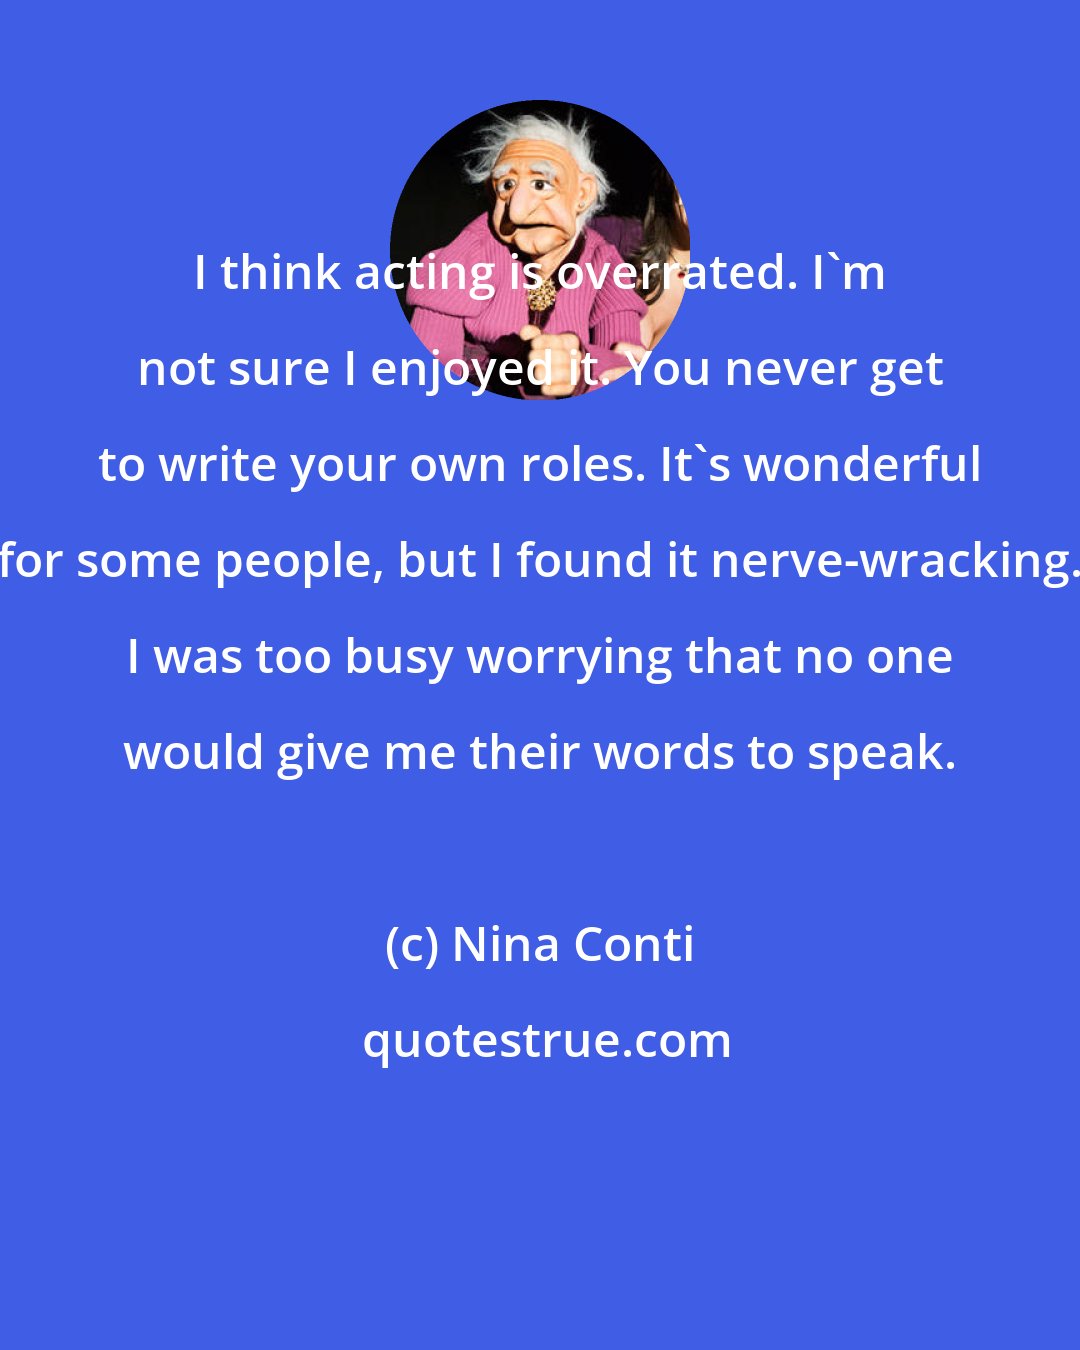 Nina Conti: I think acting is overrated. I'm not sure I enjoyed it. You never get to write your own roles. It's wonderful for some people, but I found it nerve-wracking. I was too busy worrying that no one would give me their words to speak.